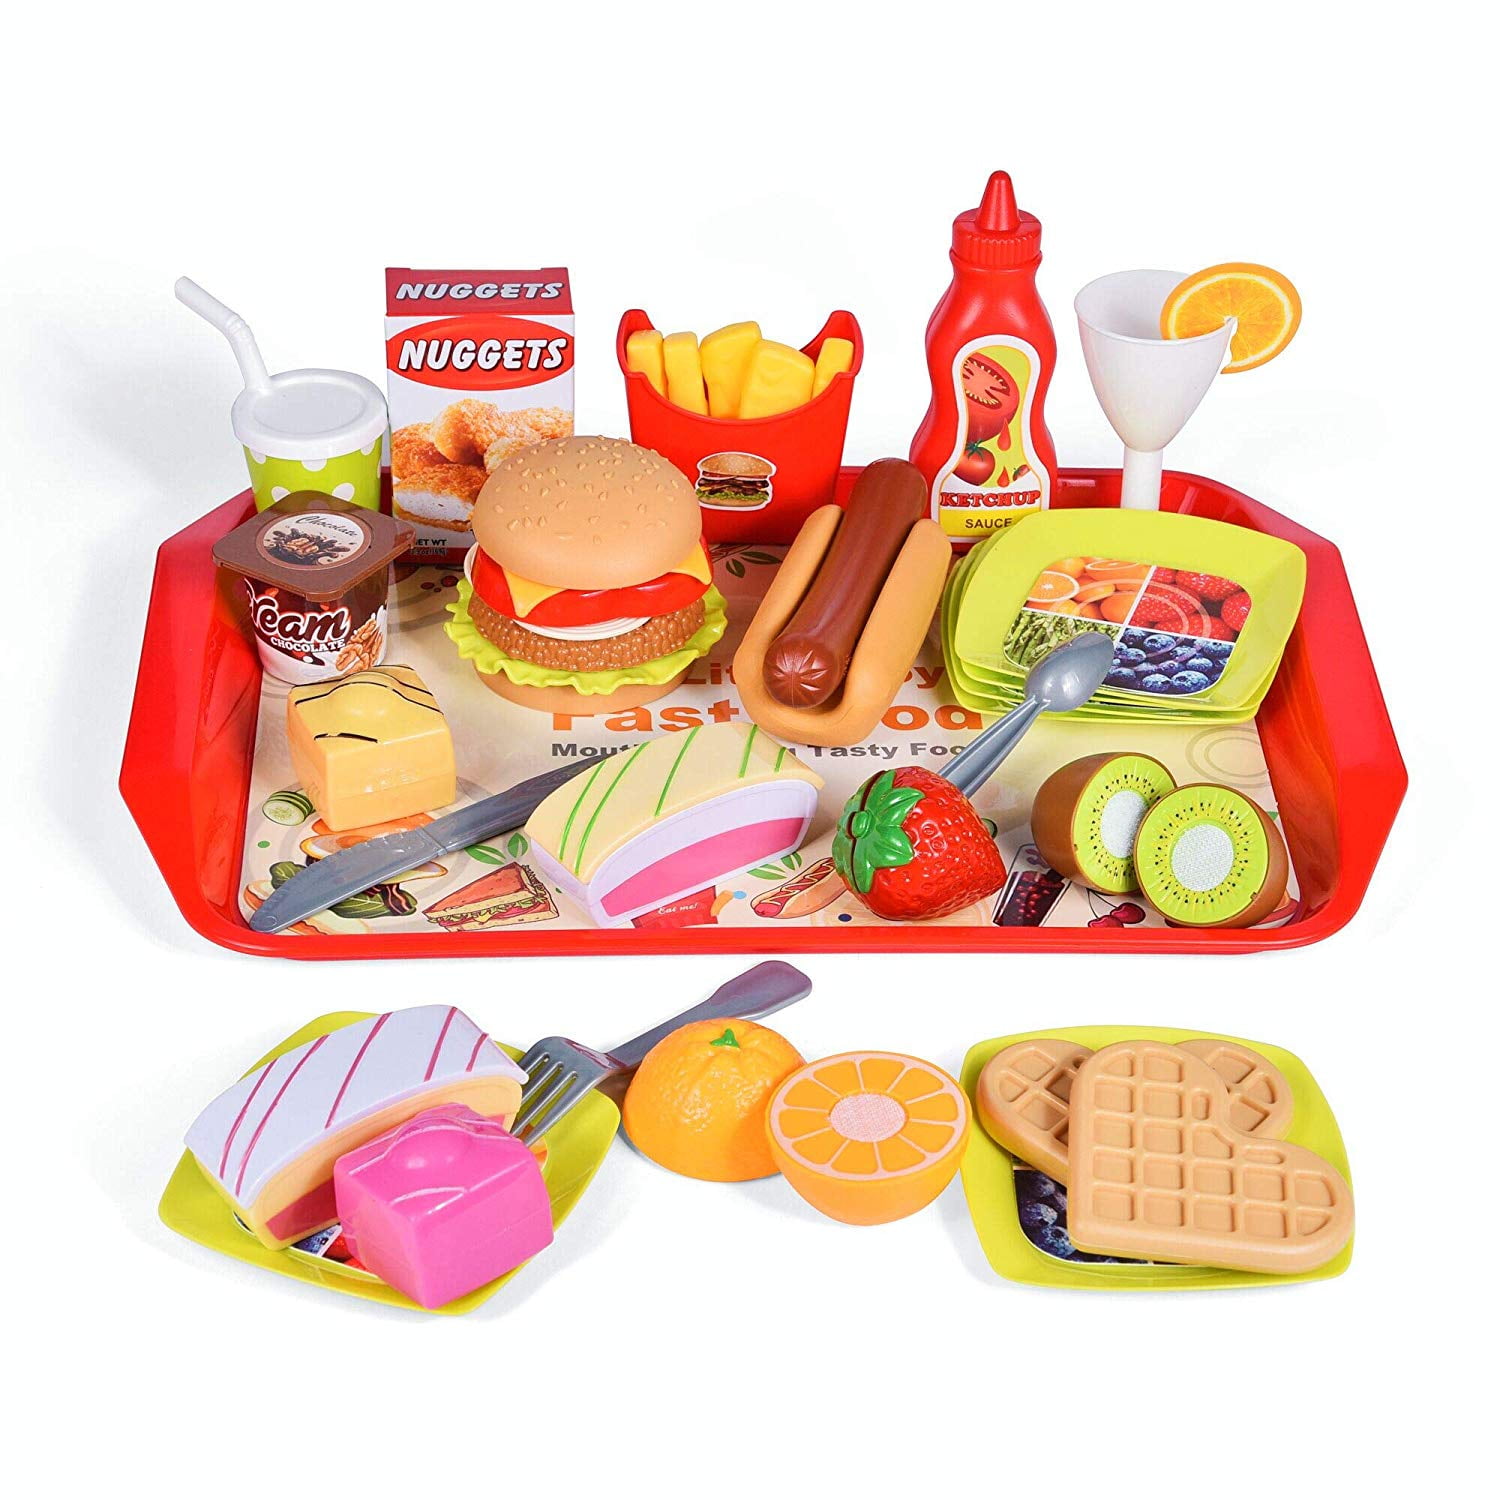 Timy Play Food Kitchen Wooden Pretend Cutting Fruits Playset for Kids Toddlers